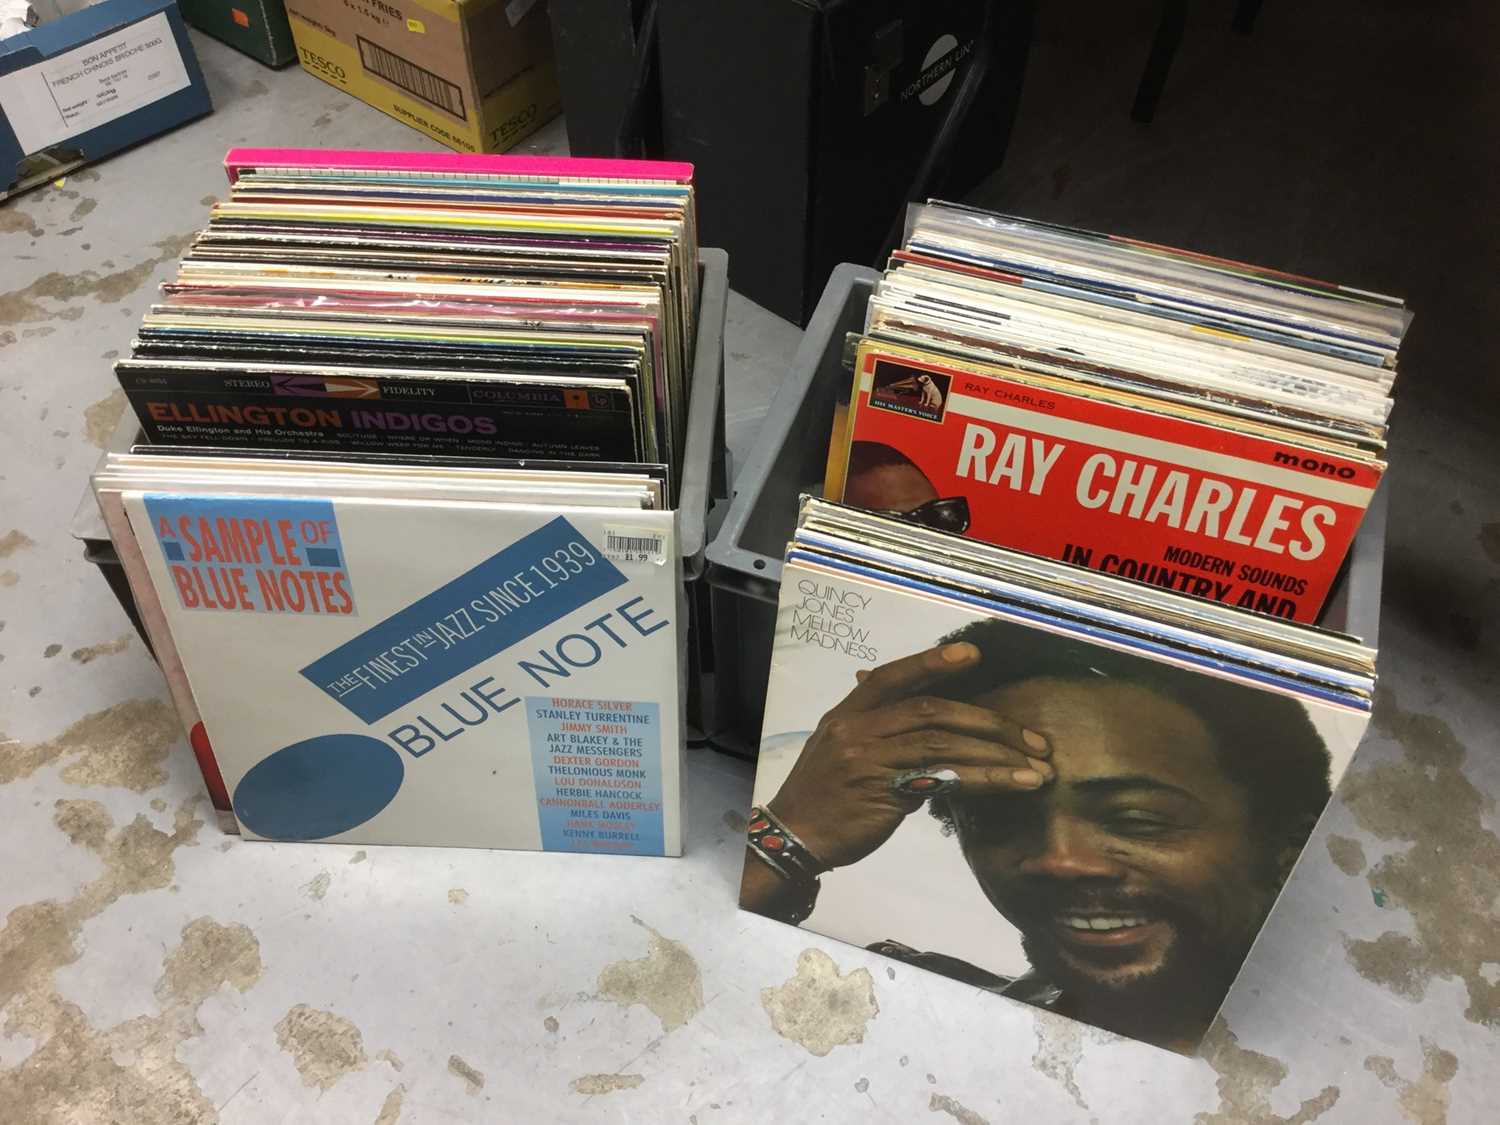 Lot 318 - Selection of LP records including Miles Davis, Manhattan Jazz Quintet, Ray Charles, Quincy Jones, Ramsey Lewis, Crusaders and Duke Ellington. Approx 115. Most appear to be in very good and excellen...